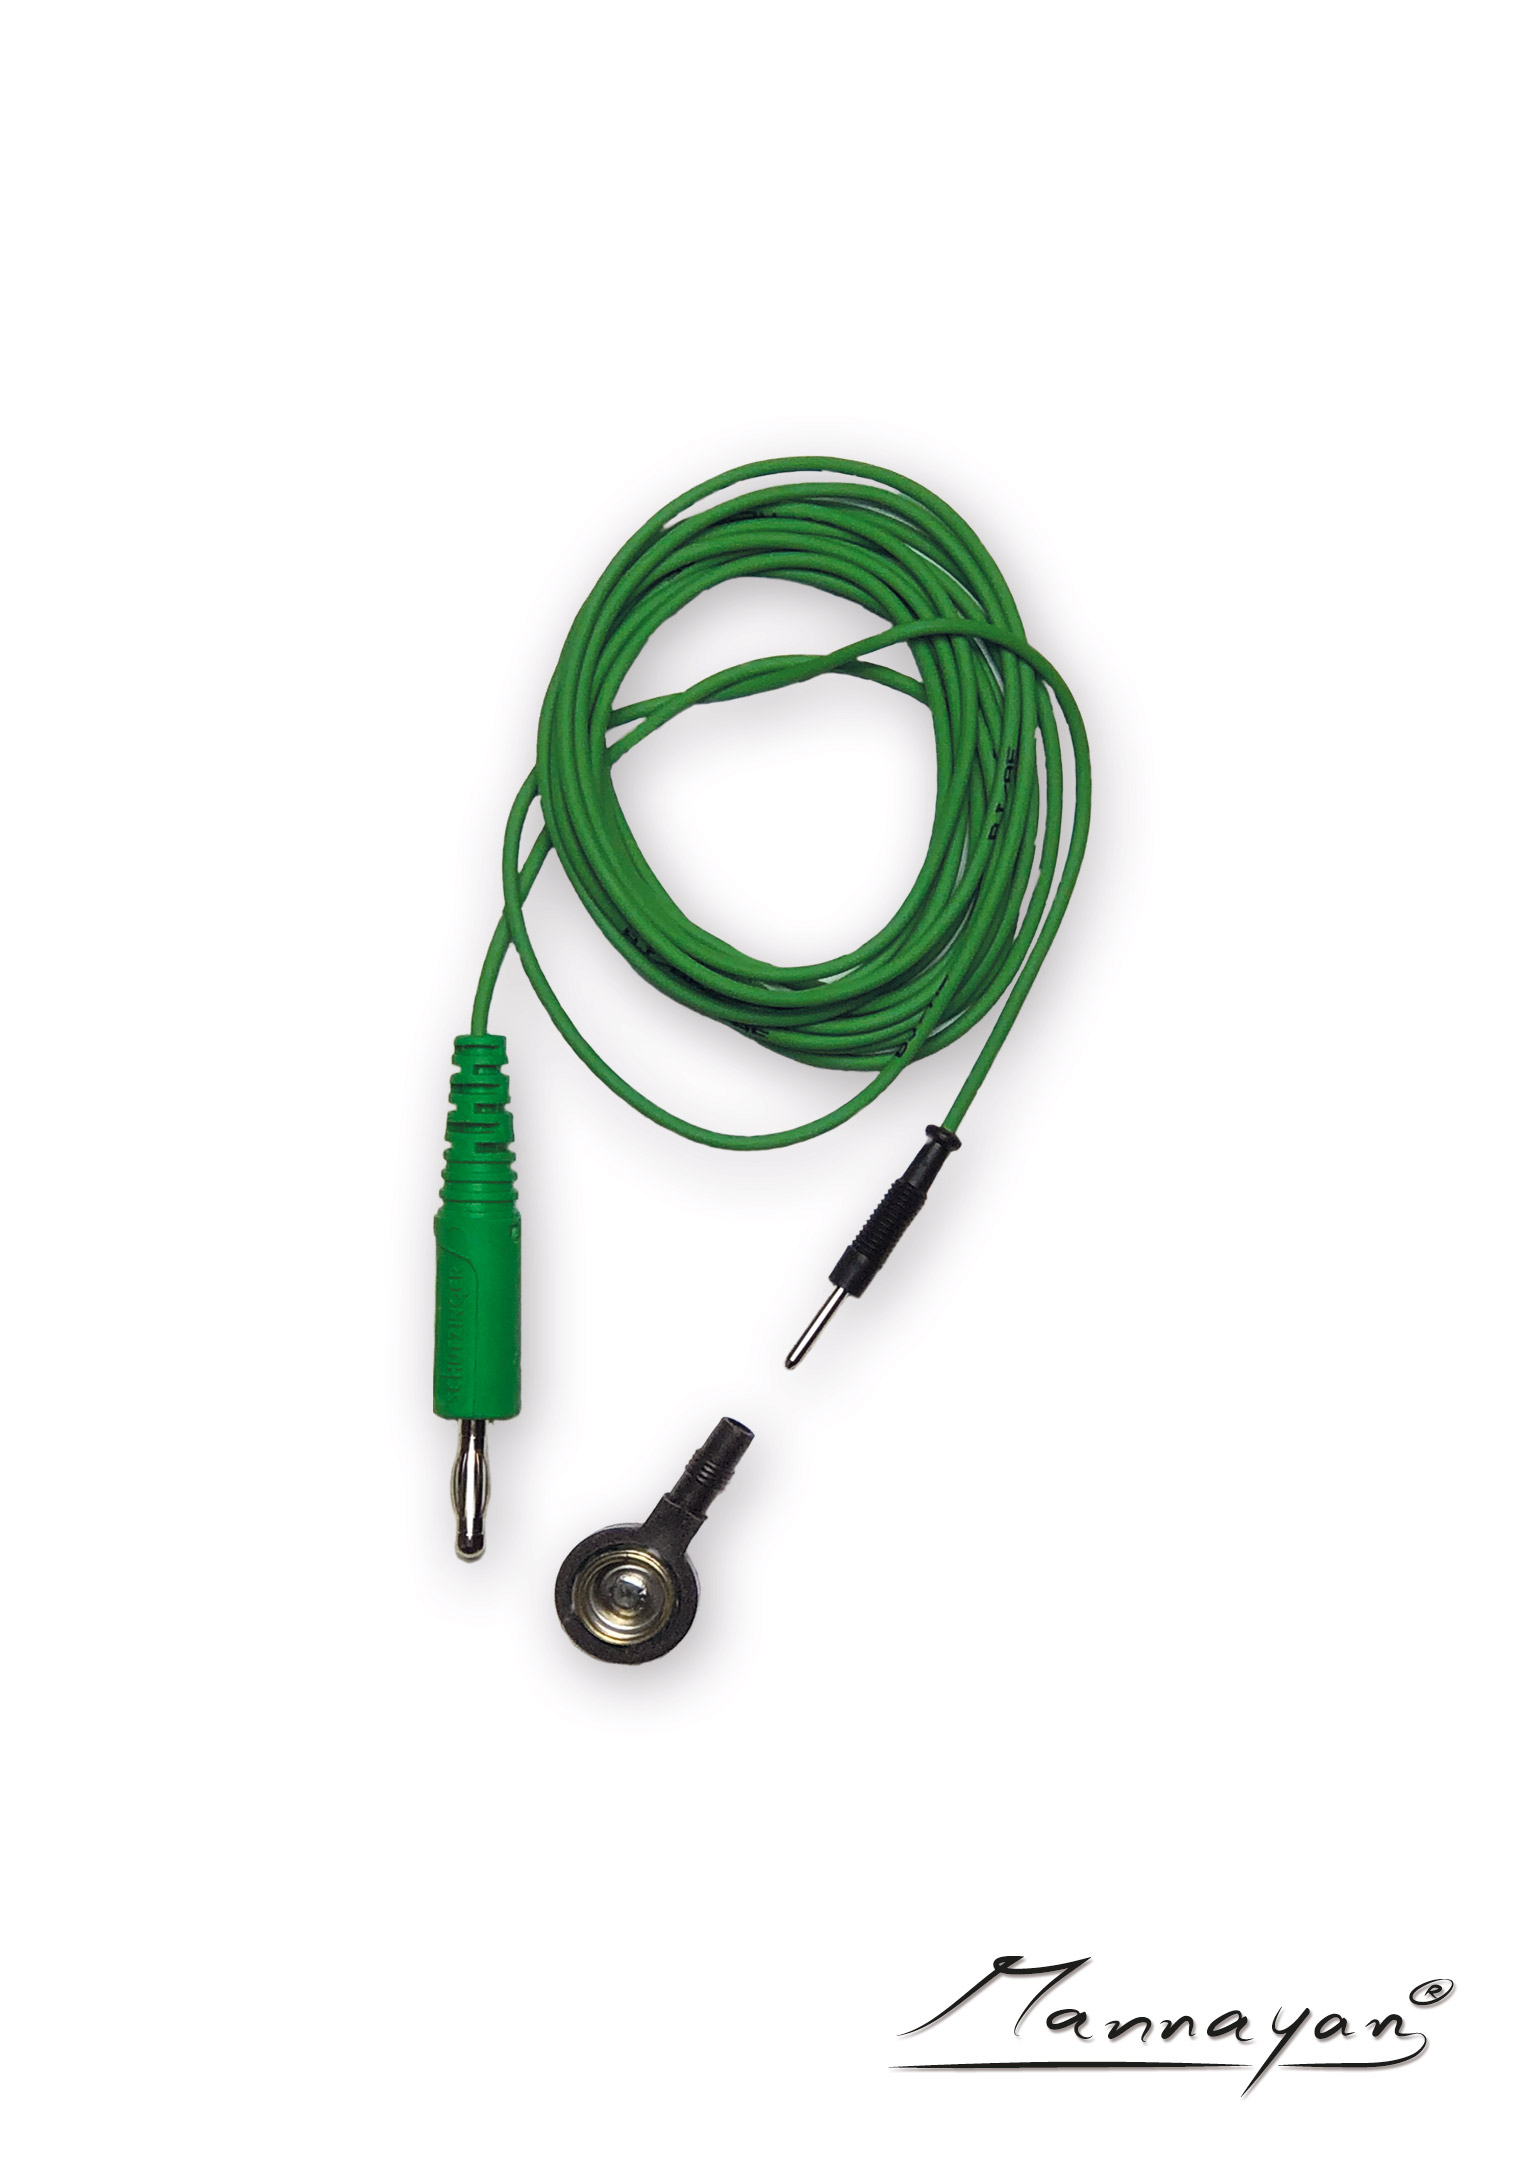 Cable (2,5 m) with connector adapter for textile surface electrodes (green)